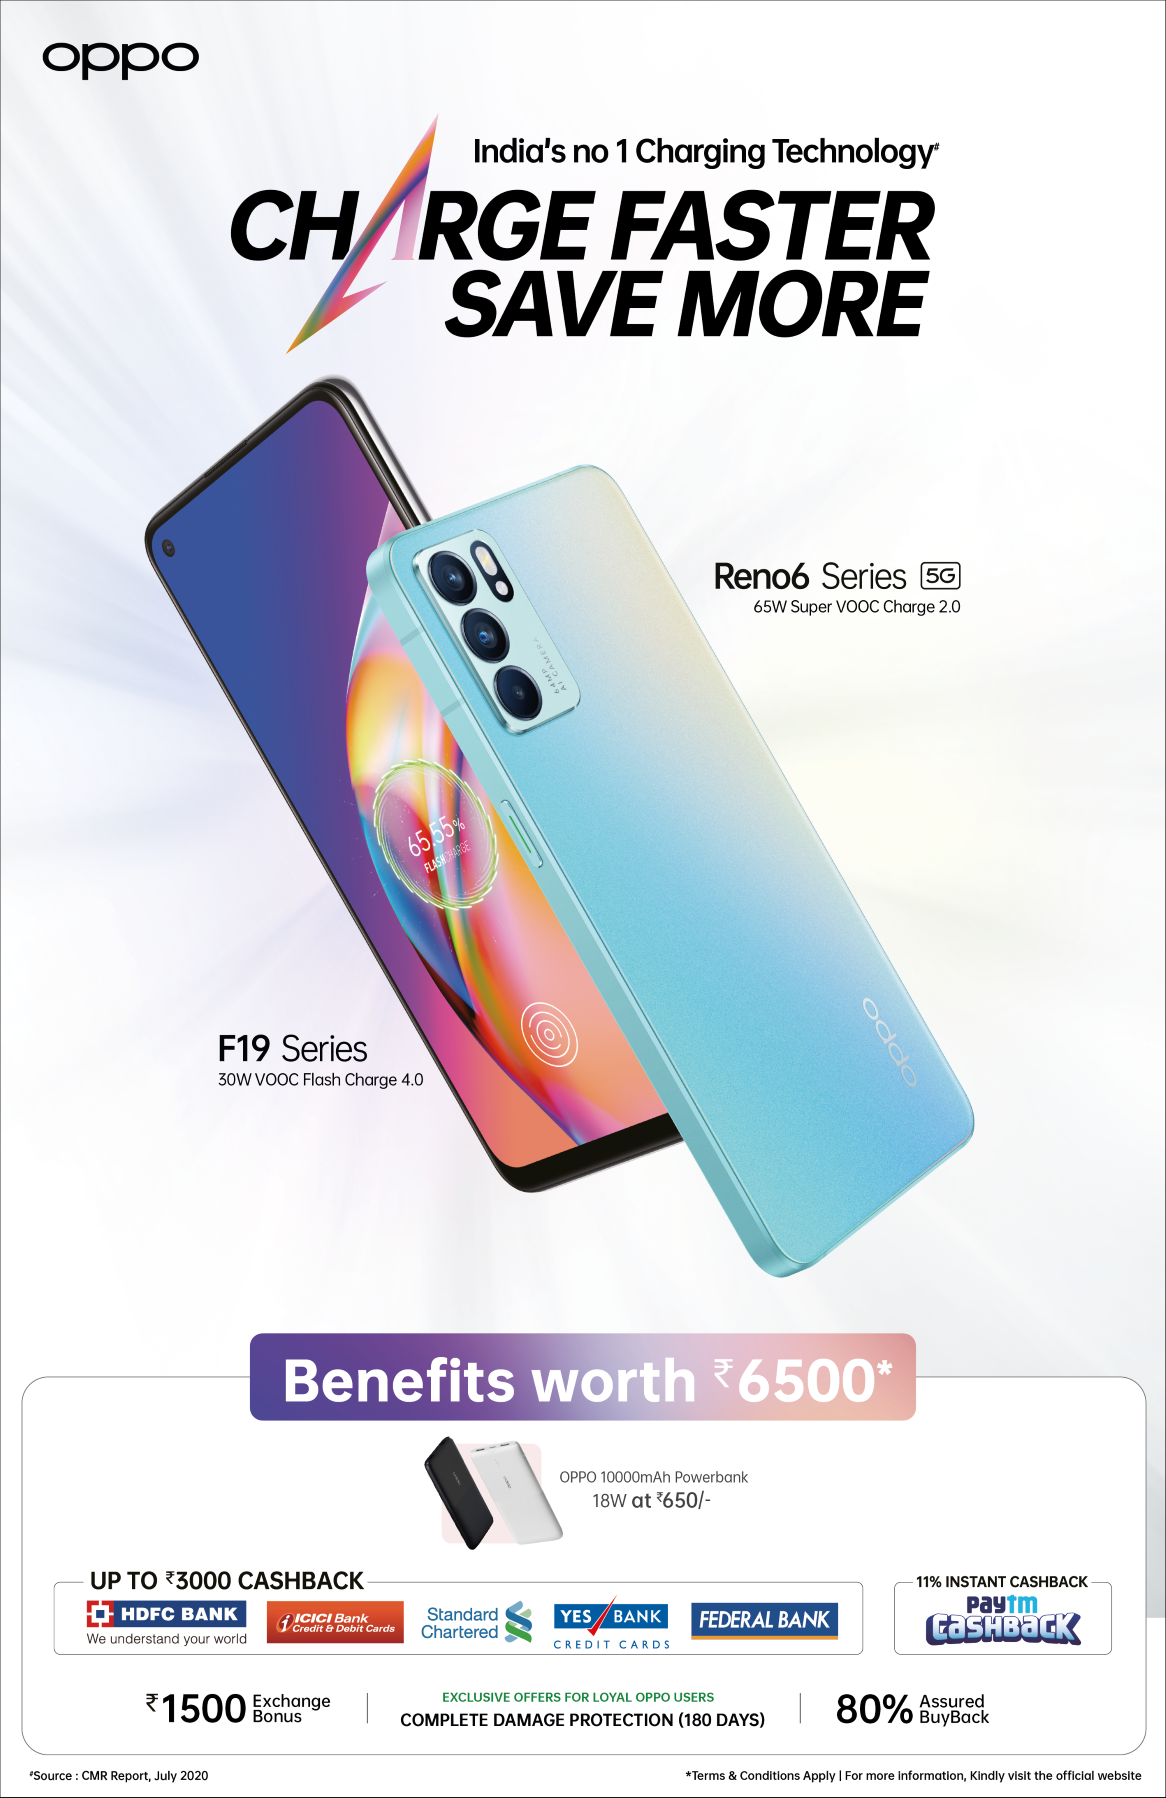 OPPO ChargeUp Campaign Image